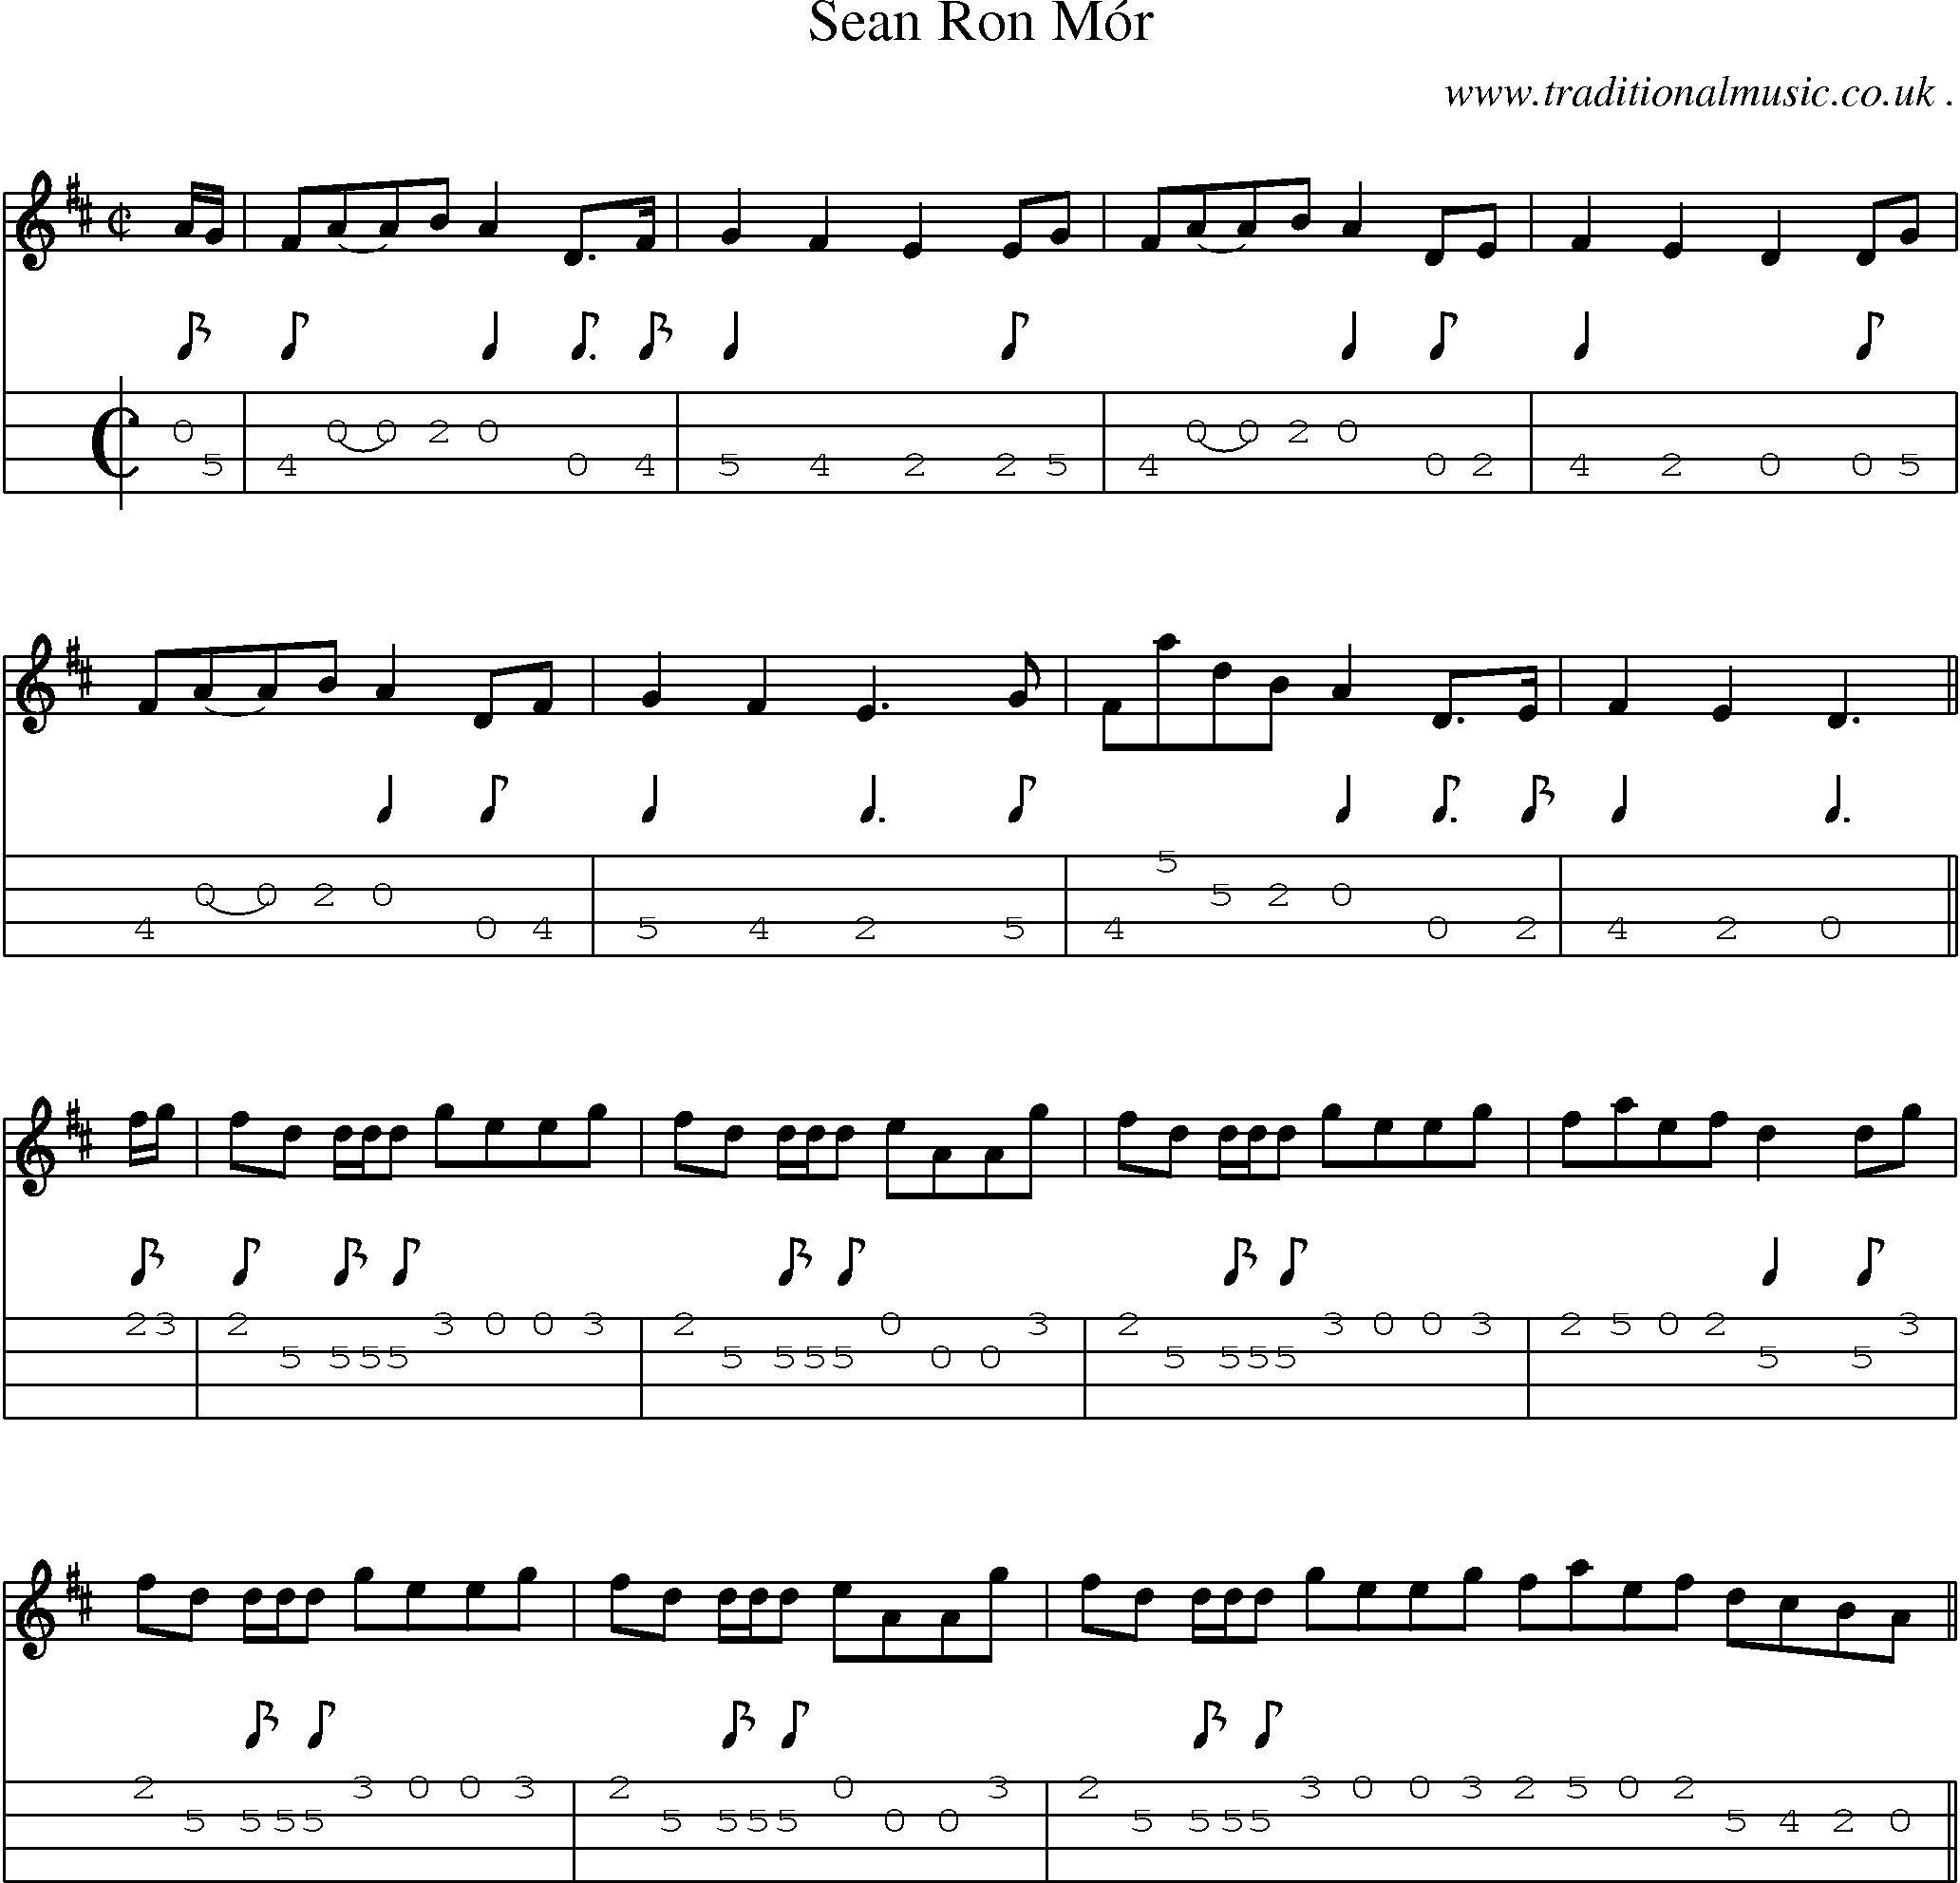 Sheet-music  score, Chords and Mandolin Tabs for Sean Ron Mor